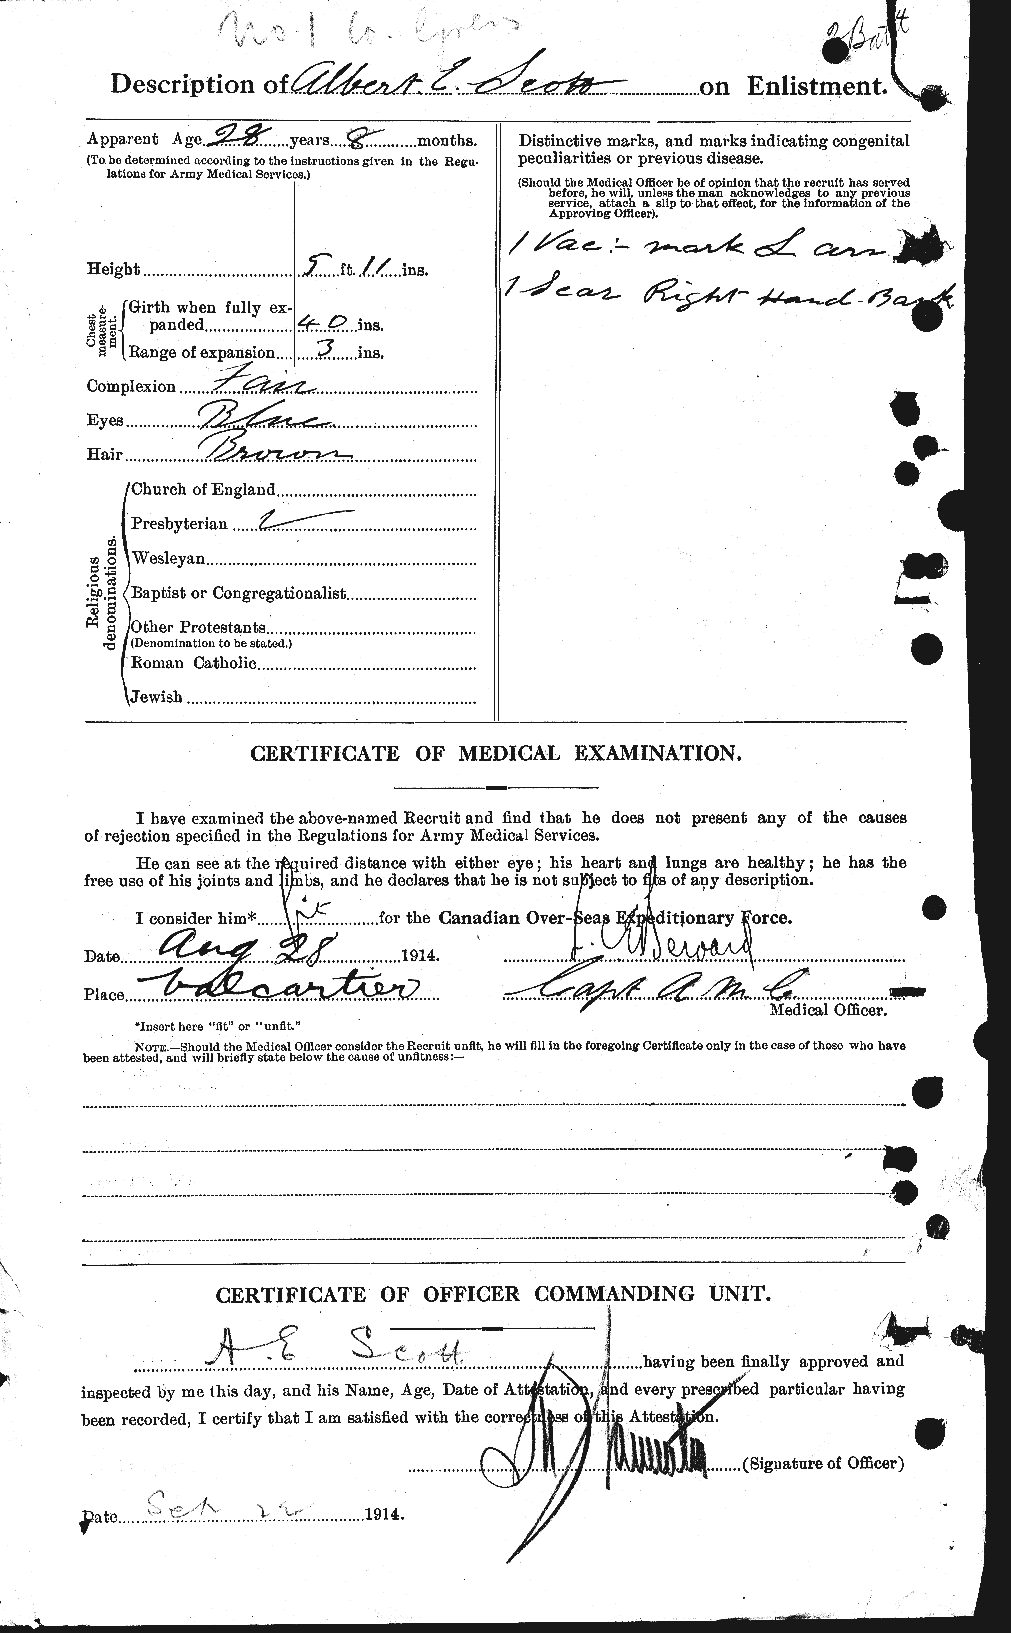 Personnel Records of the First World War - CEF 079275b